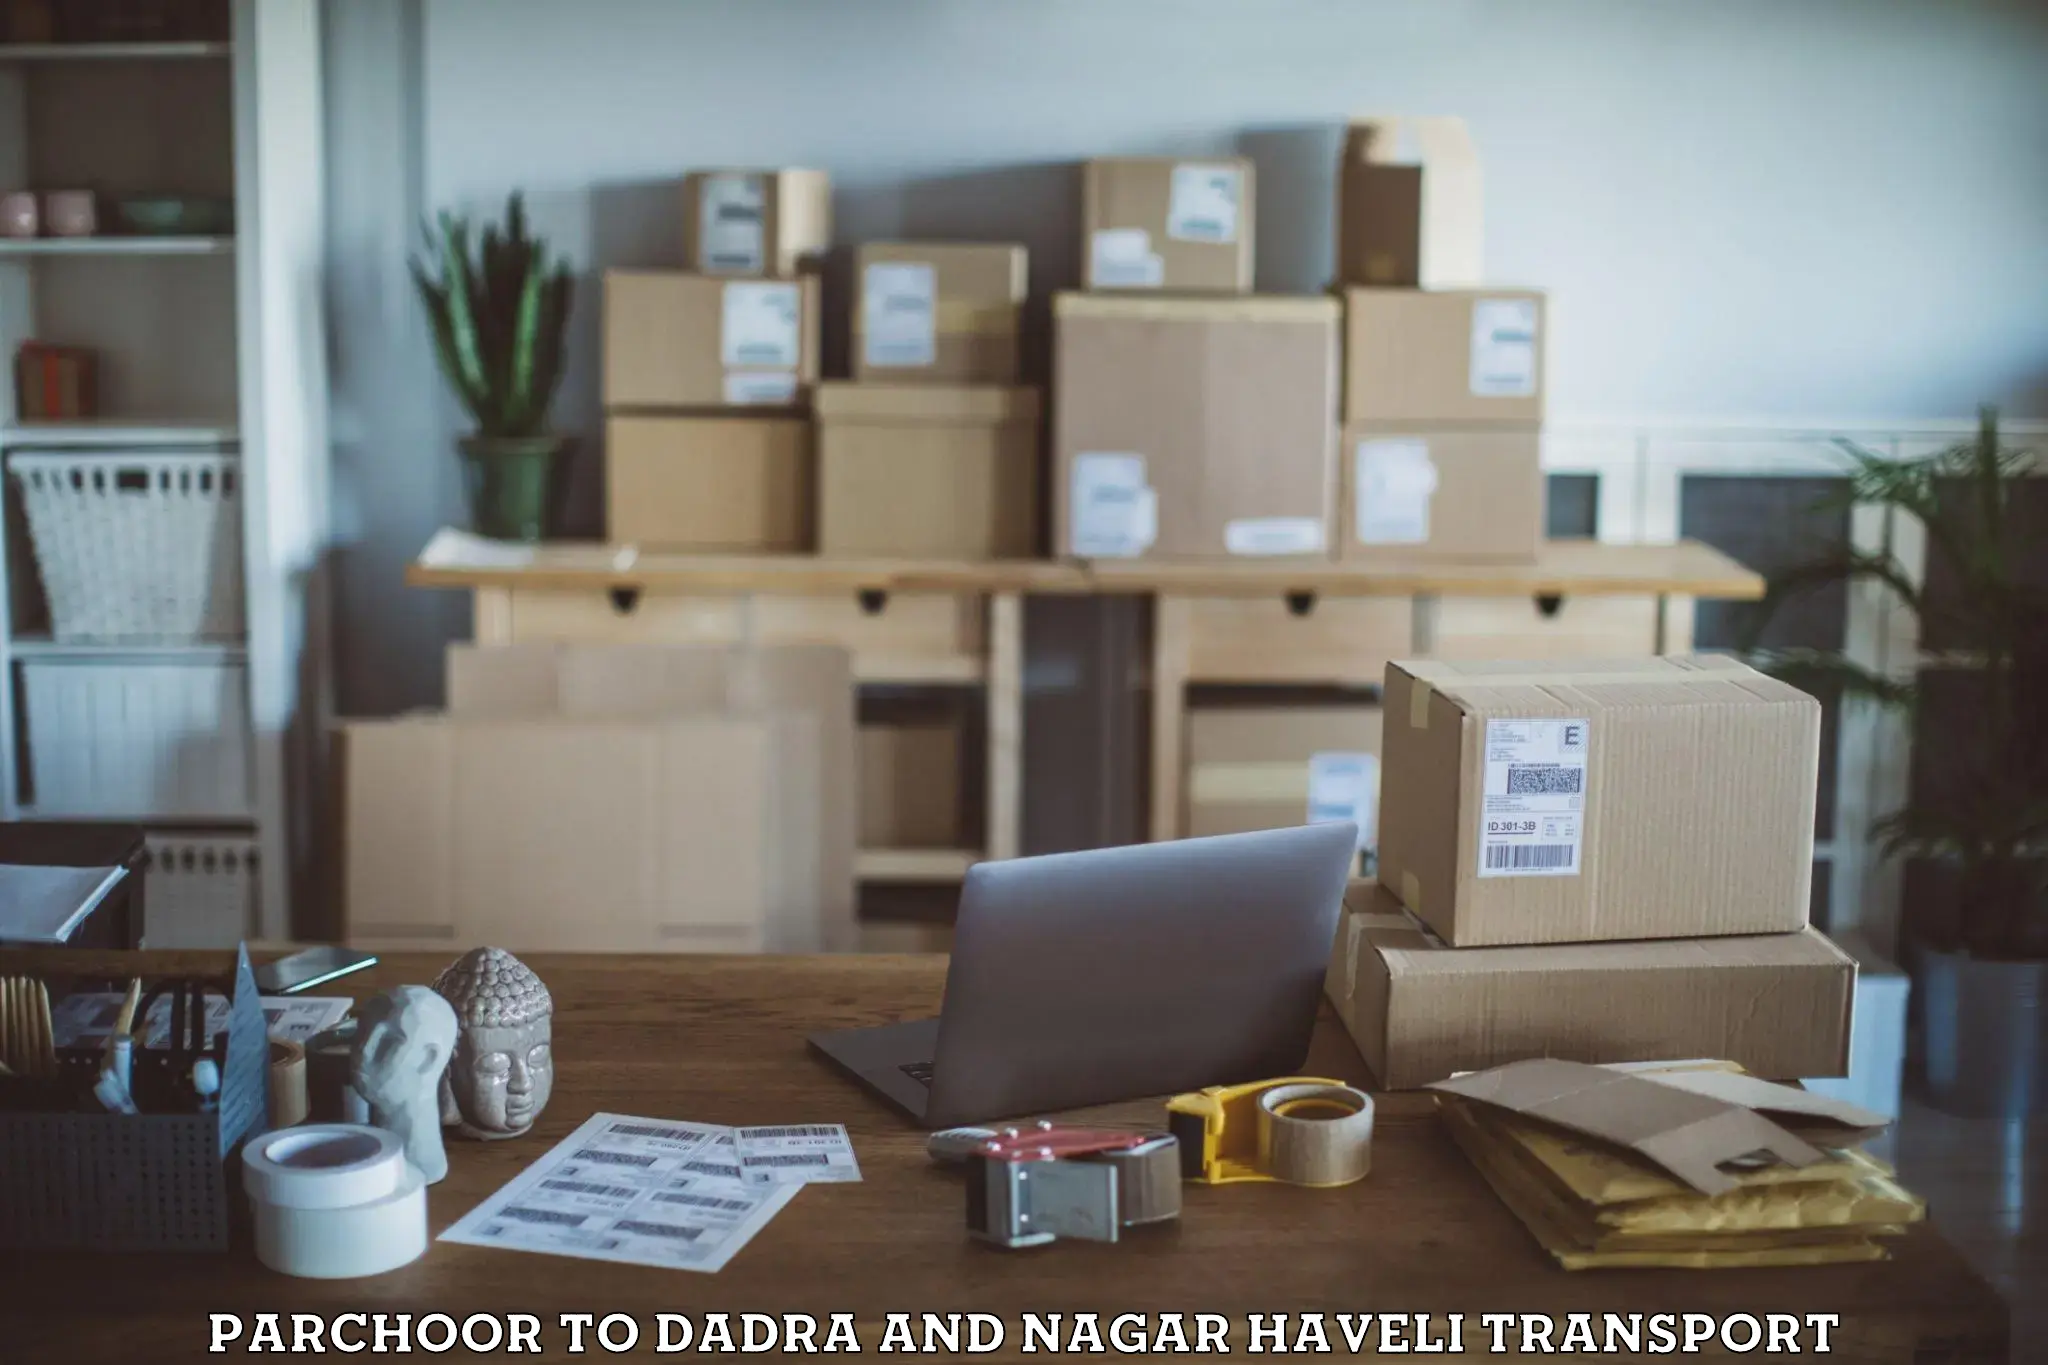 Package delivery services Parchoor to Dadra and Nagar Haveli